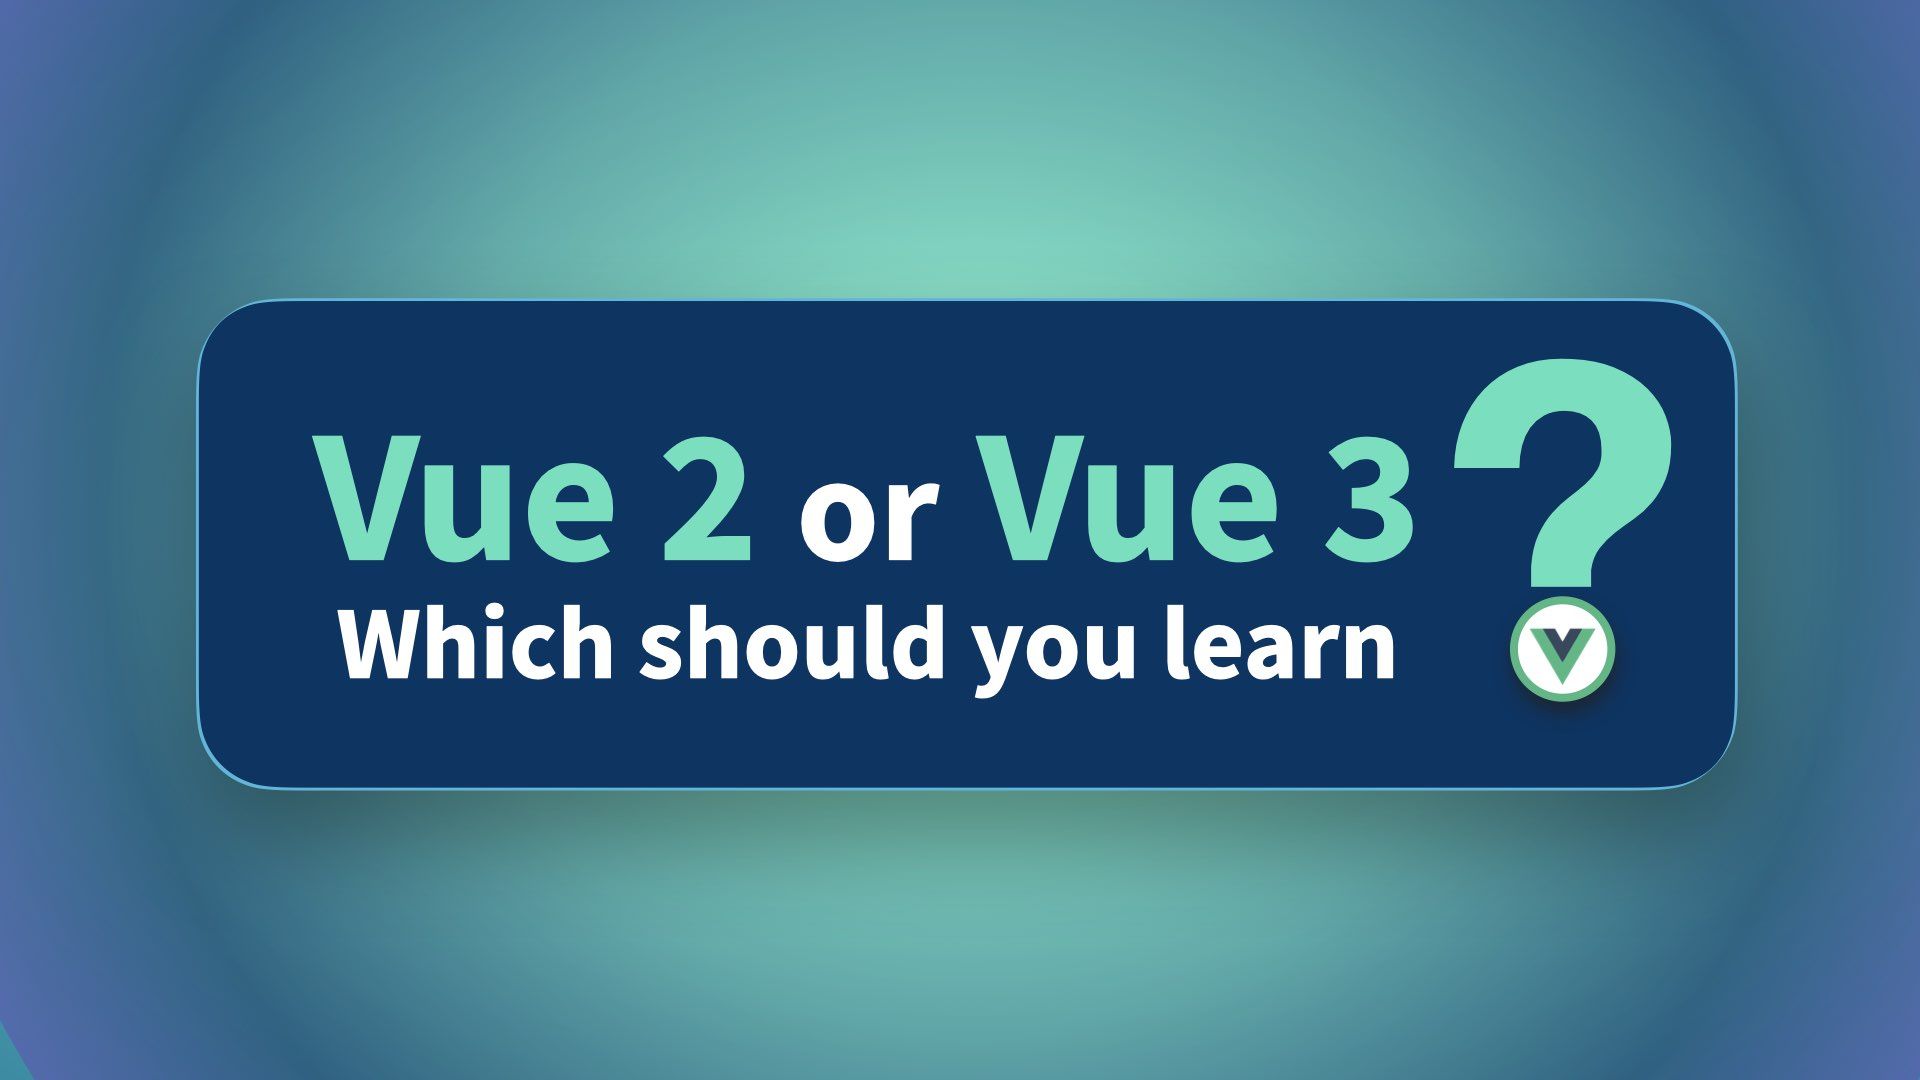 Vue 2 or Vue 3? Which should I learn in 2022?